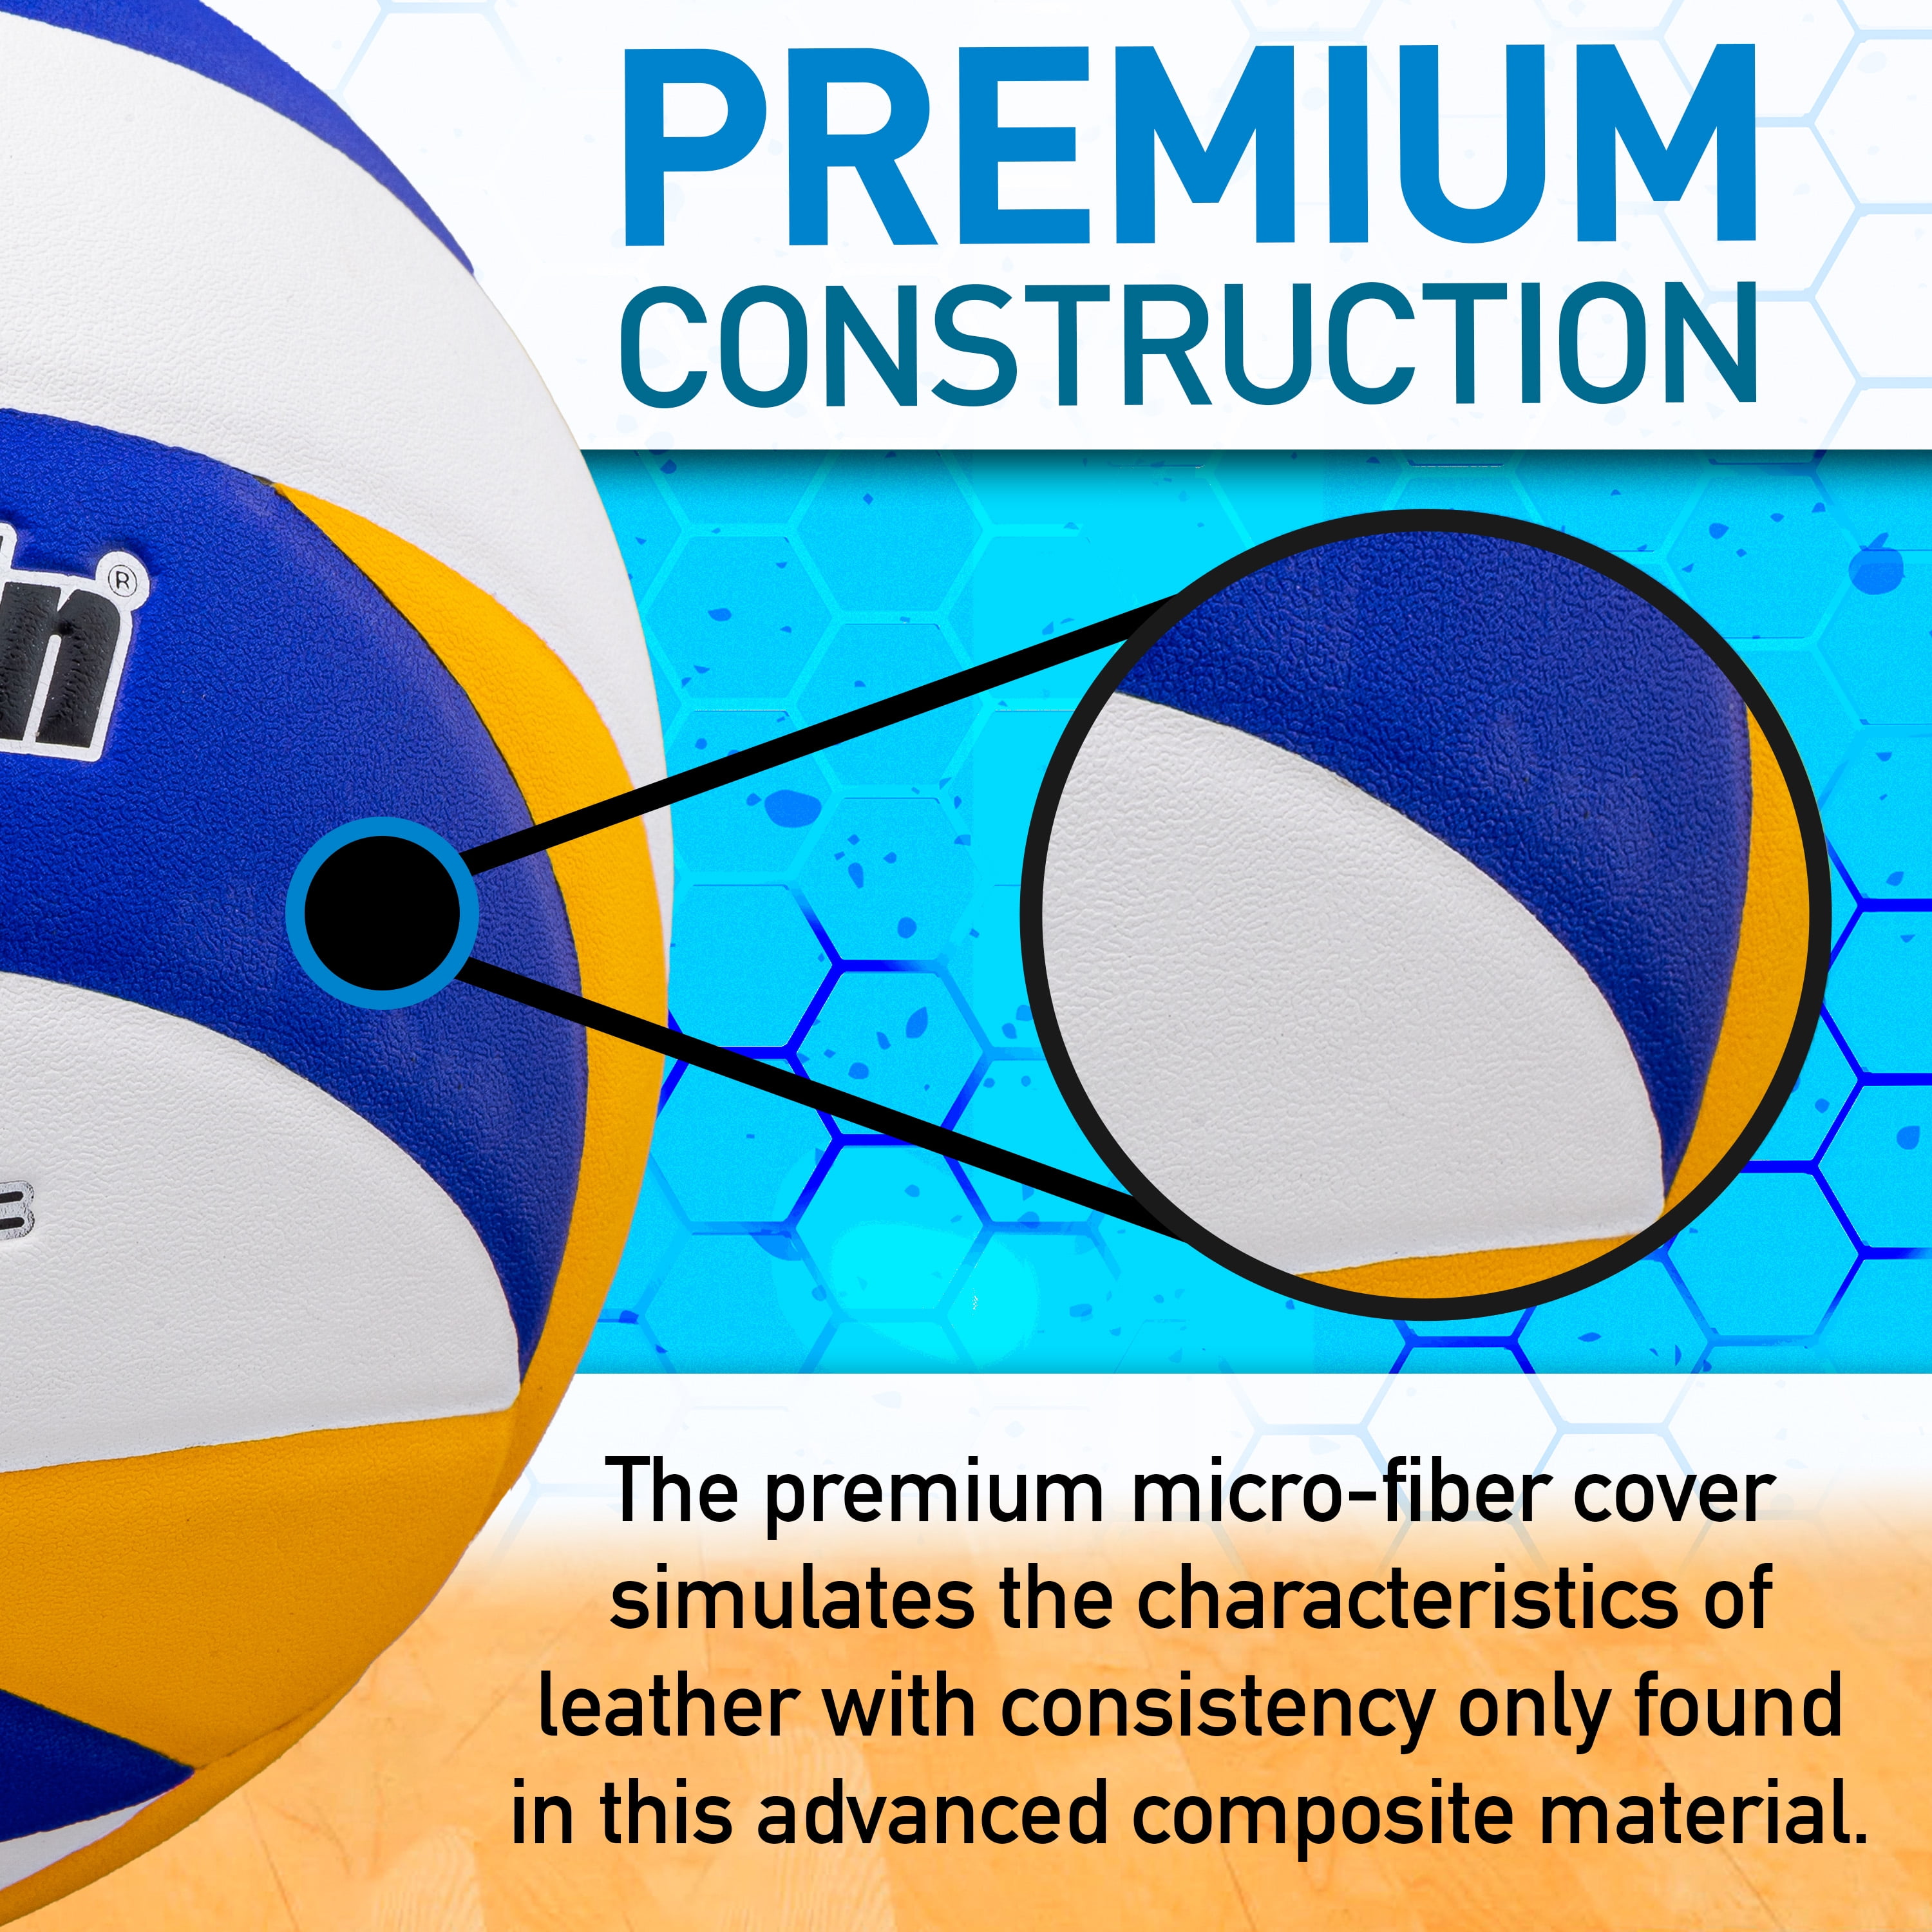 Franklin Sports 9000 Indoor Volleyball - Official Size and Weight Volleyball - Advanced Performance - Premium Soft Cover and Bounce - Air Pump Included